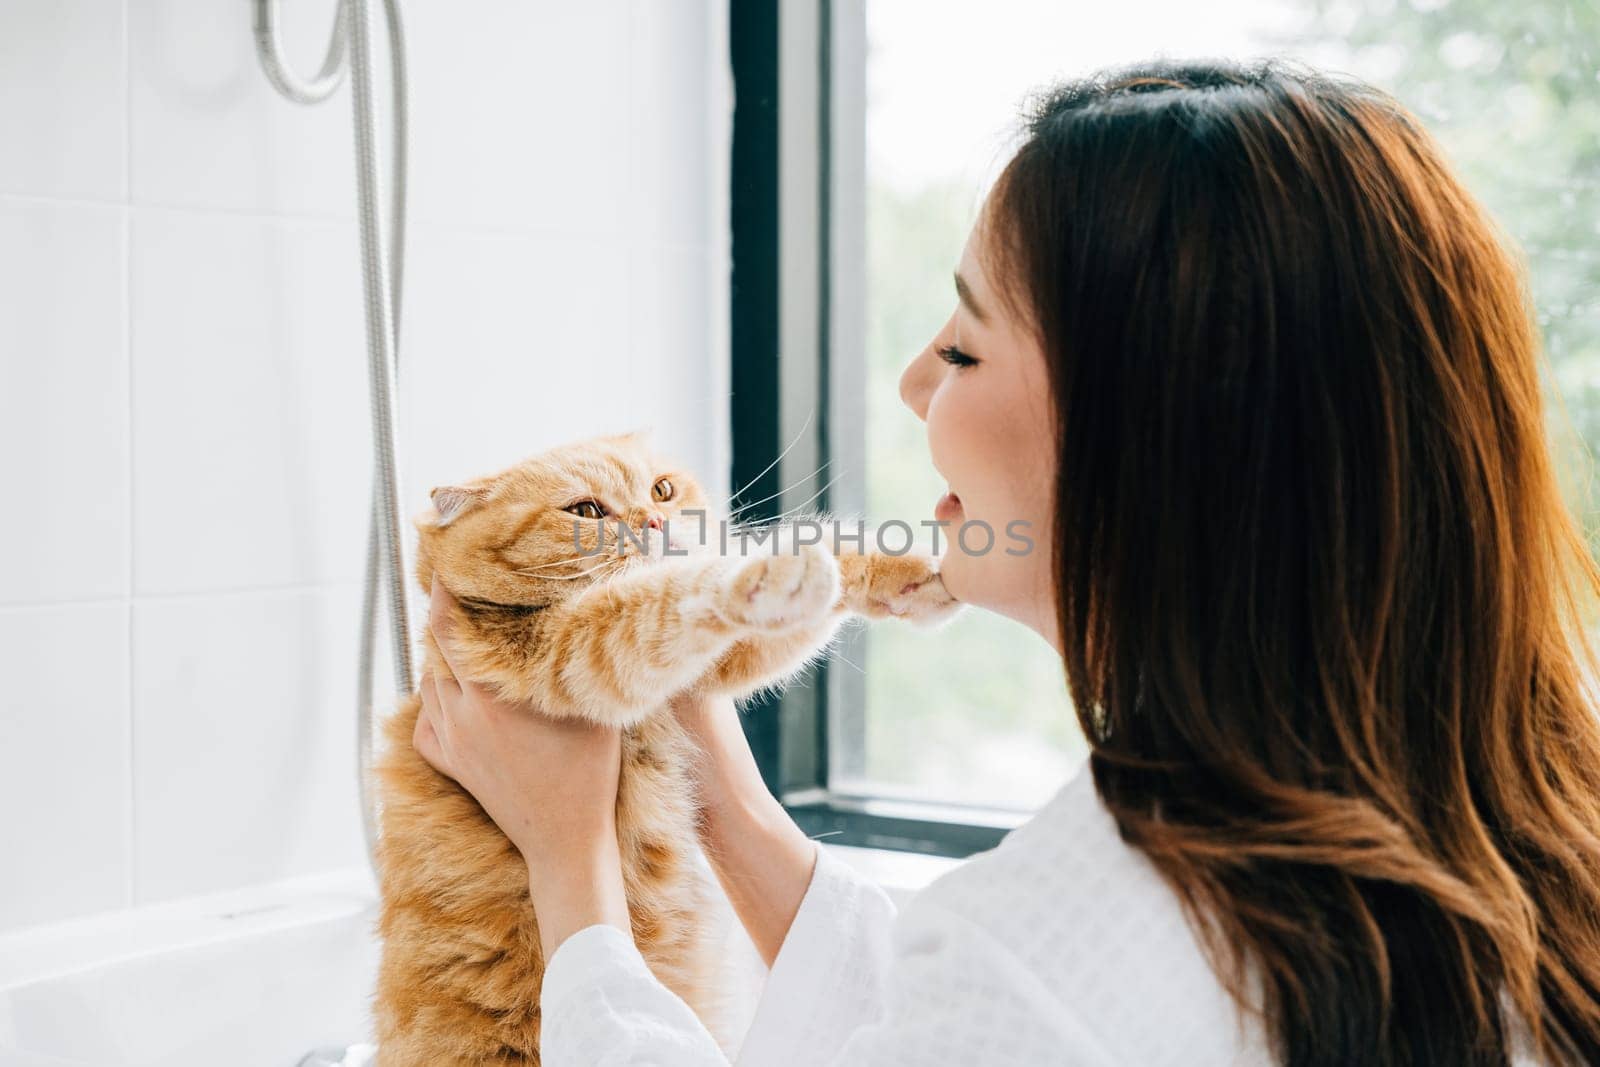 A clean and joyful bathroom scene, An adult woman lovingly holds her Scottish Fold cat during her bath, radiating pure owner-pet love. by Sorapop